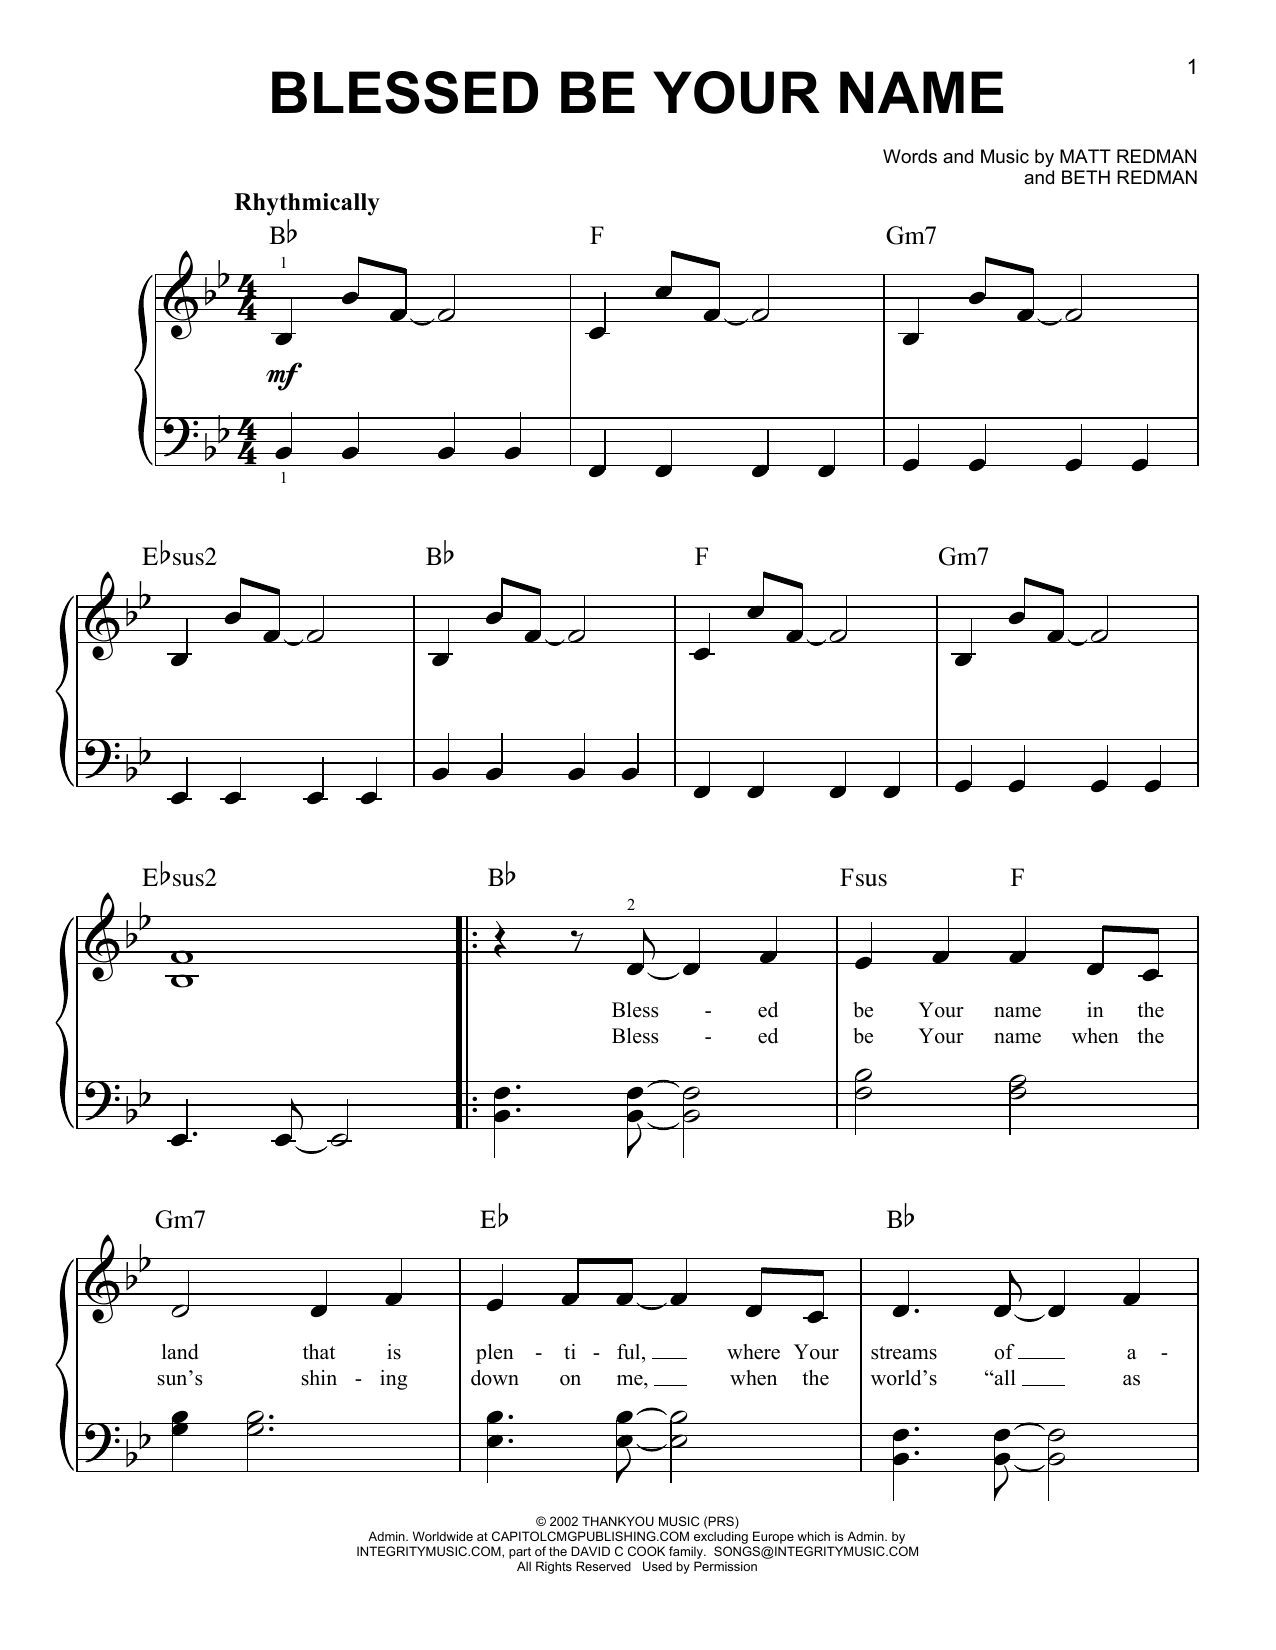 Blessed Be Your Name Chords Sheet Music Digital Files To Print Licensed Beth Redman Digital